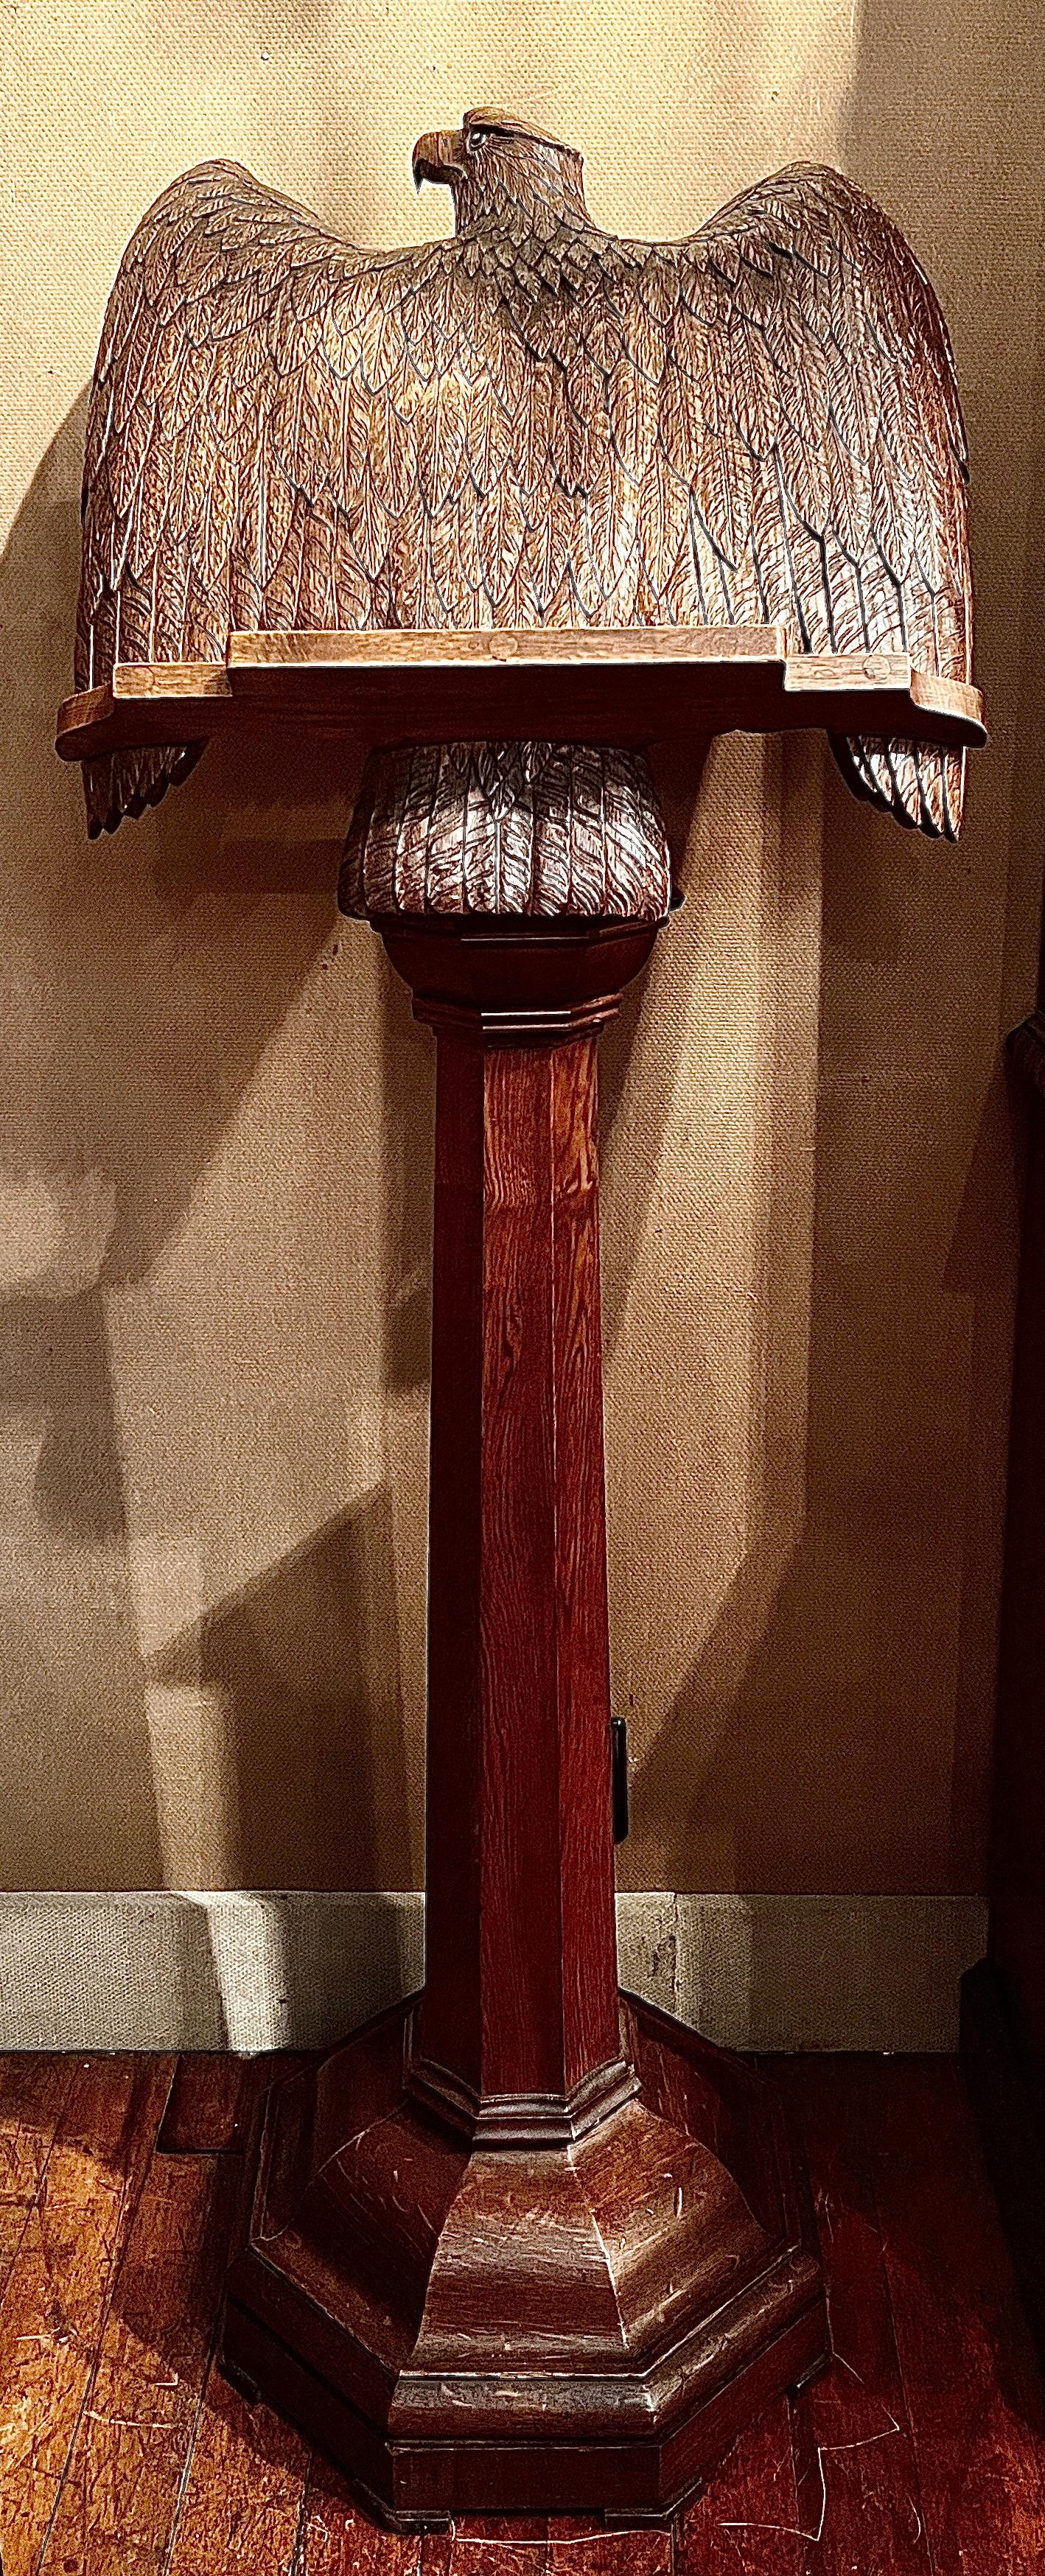 Antique Hand-Carved Solid Oak Eagle Lectern, Circa 1900's.
Masterful Carving.